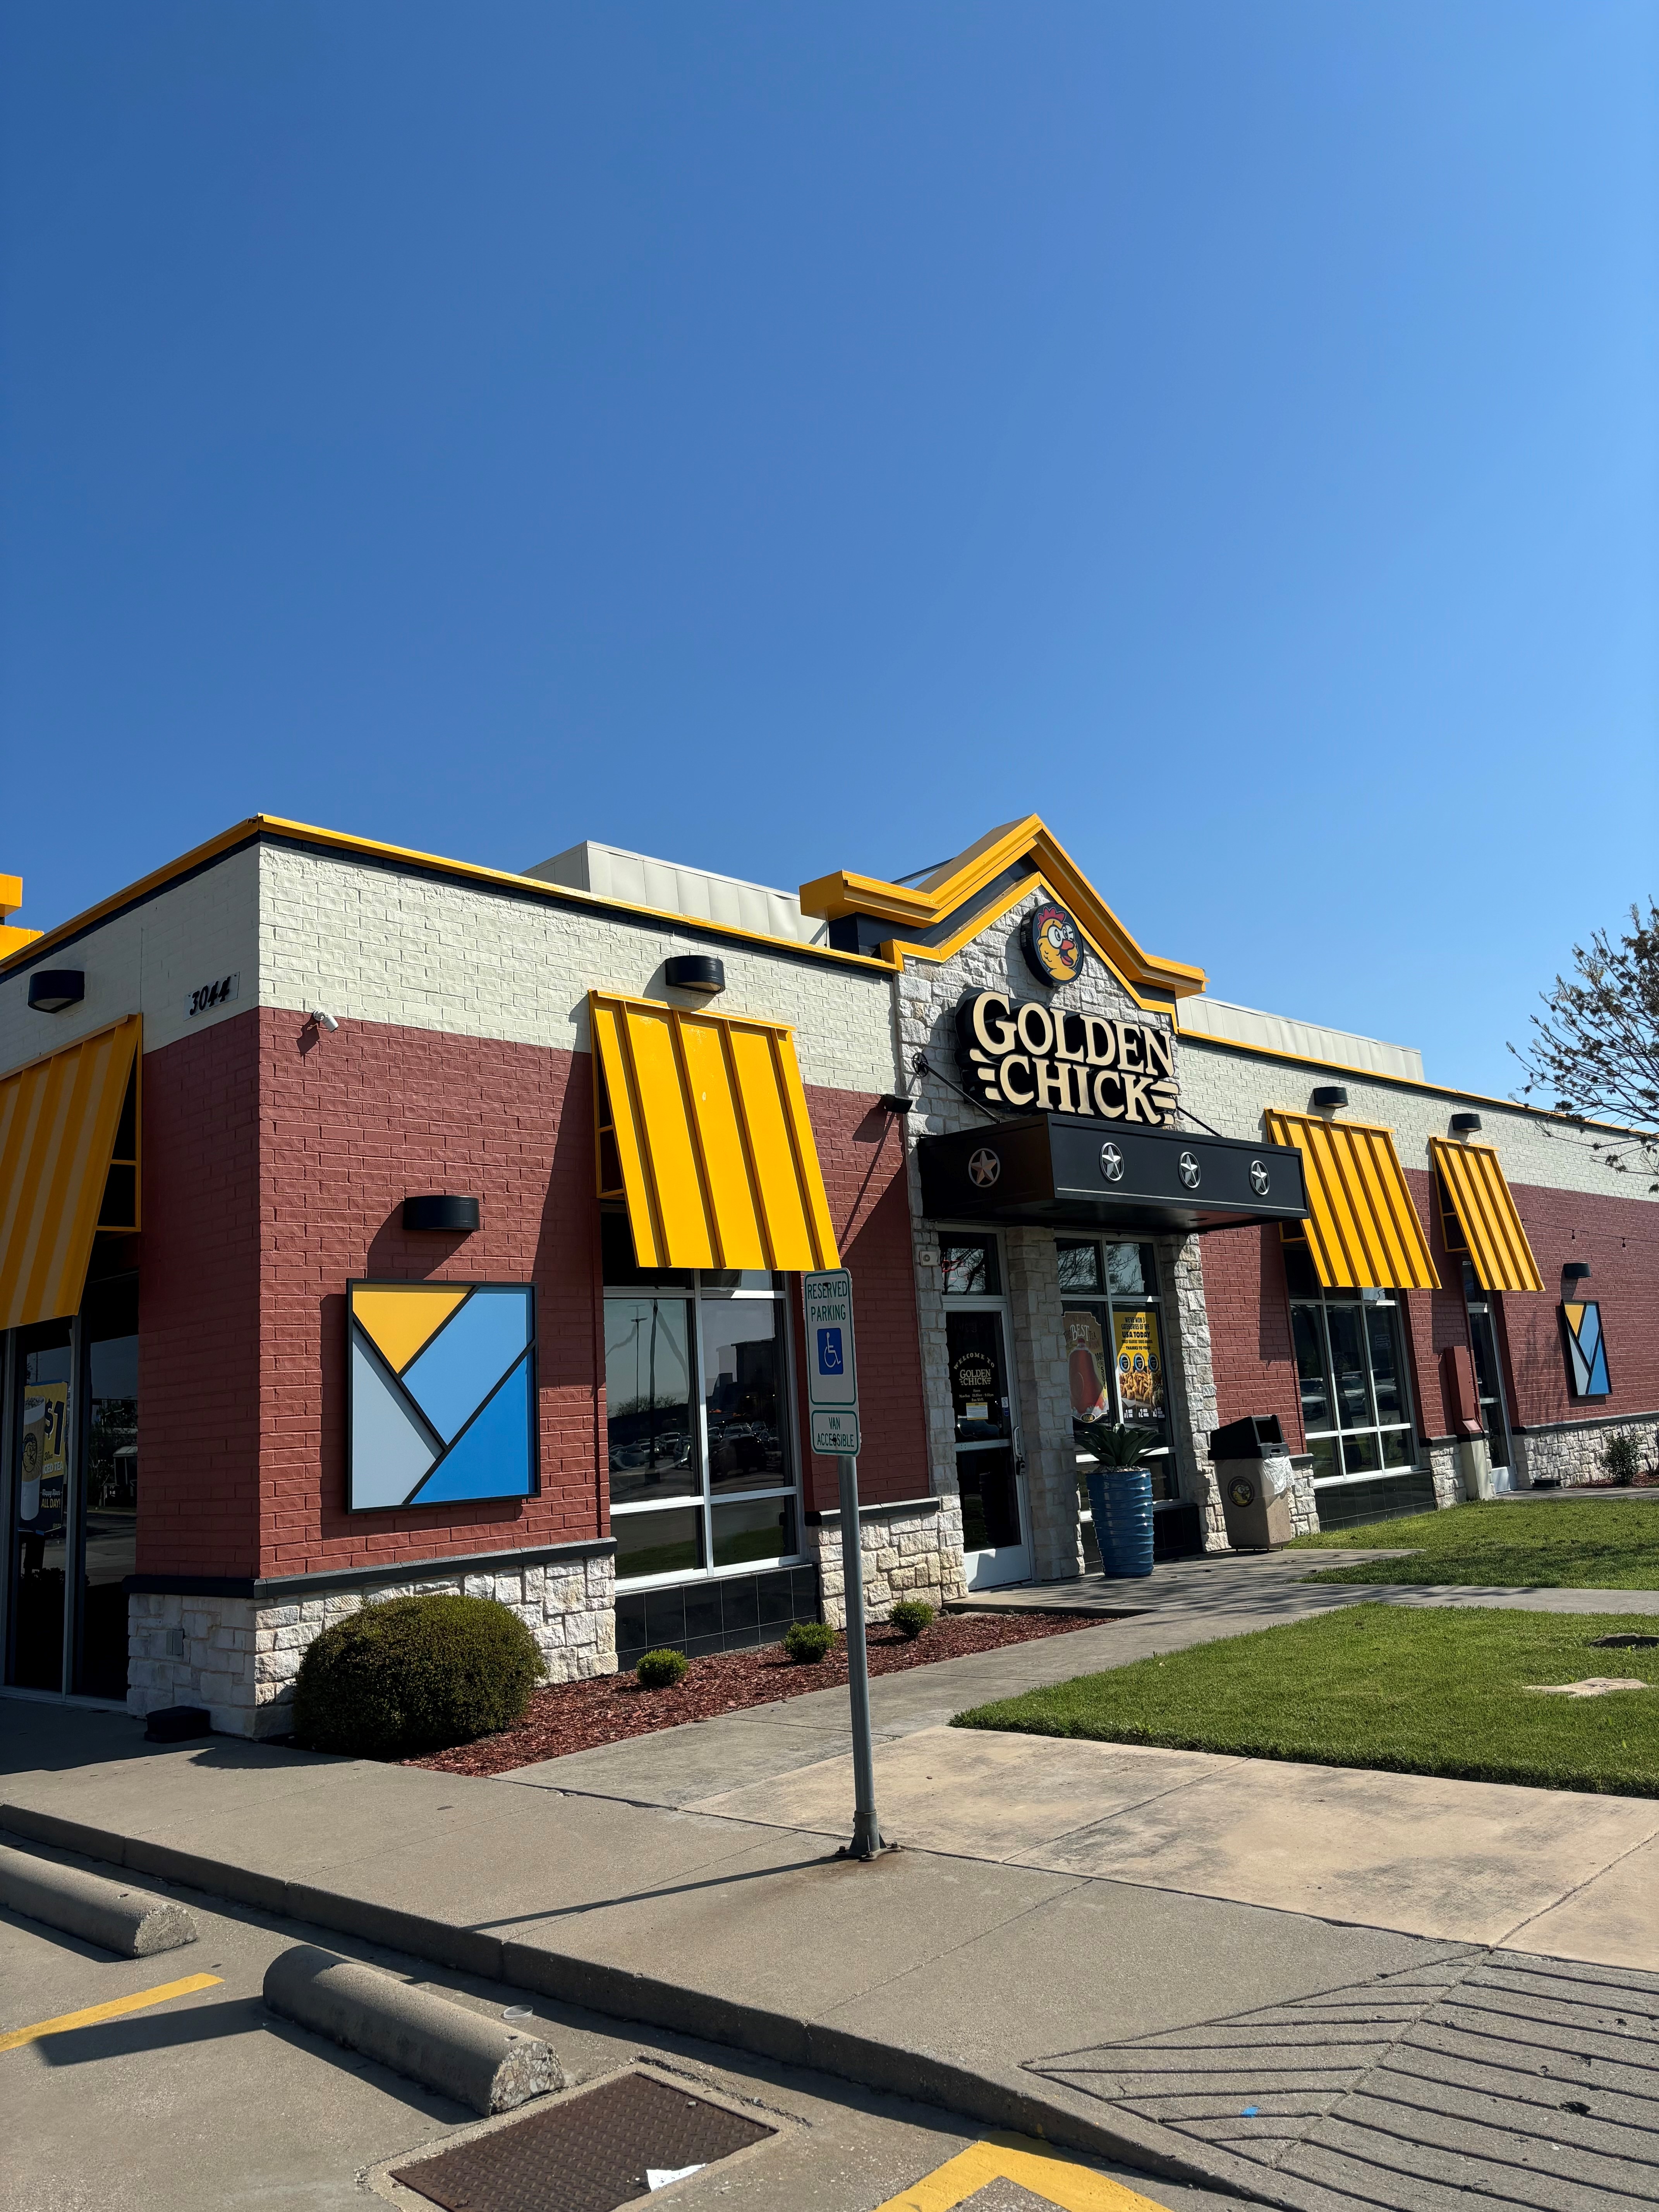 Golden Chick storefront.  Your local Golden Chick fast food restaurant in Carrollton, Texas